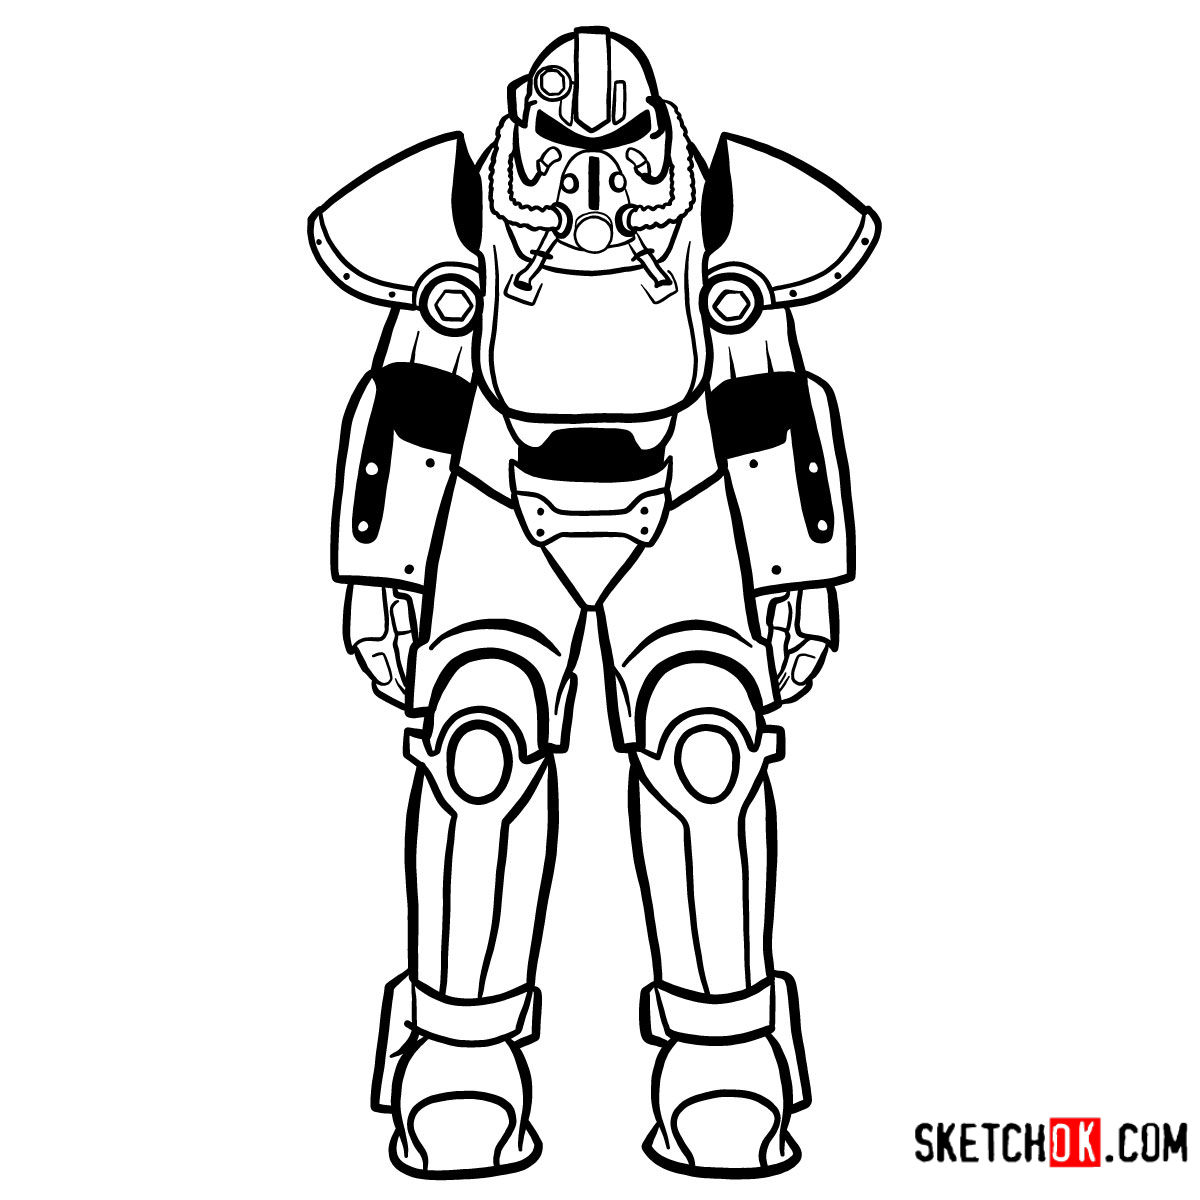 How to draw T-51 power armor | Fallout